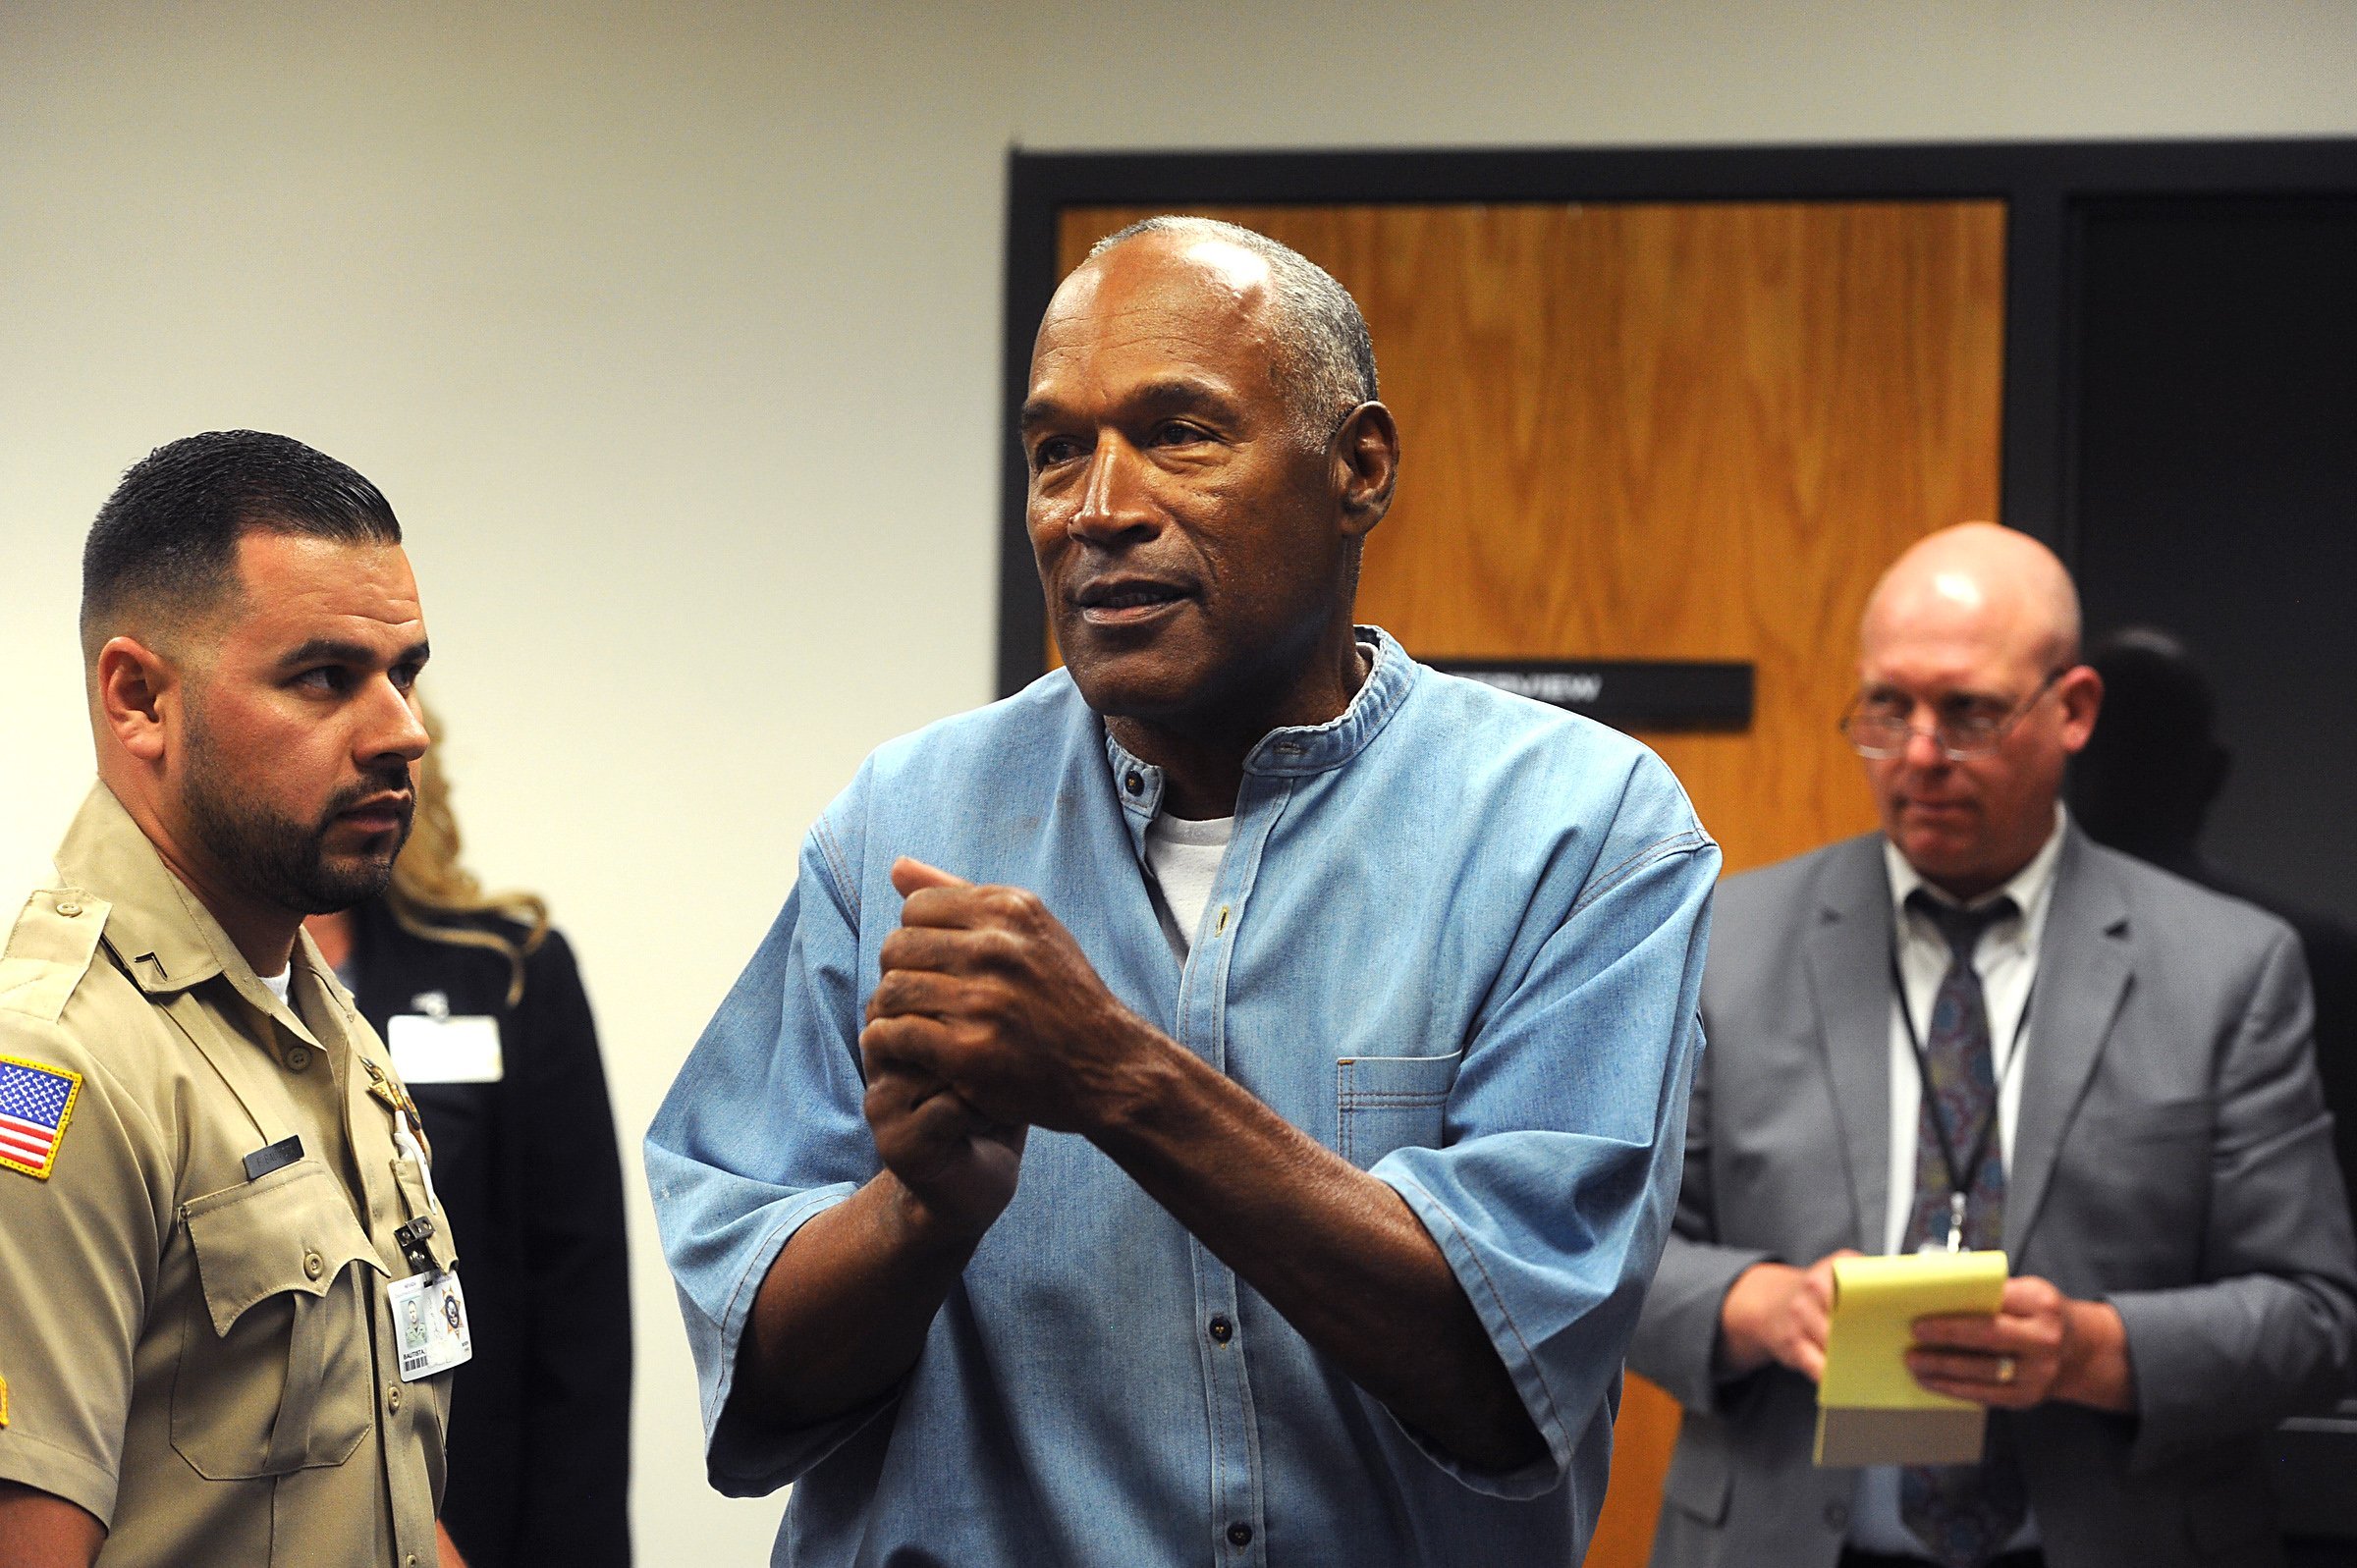 O.J. Simpson after a parole hearing at Lovelock Correctional Center in Lovelock, Nevada, U.S., on July 20, 2017. | Photo: Getty Images